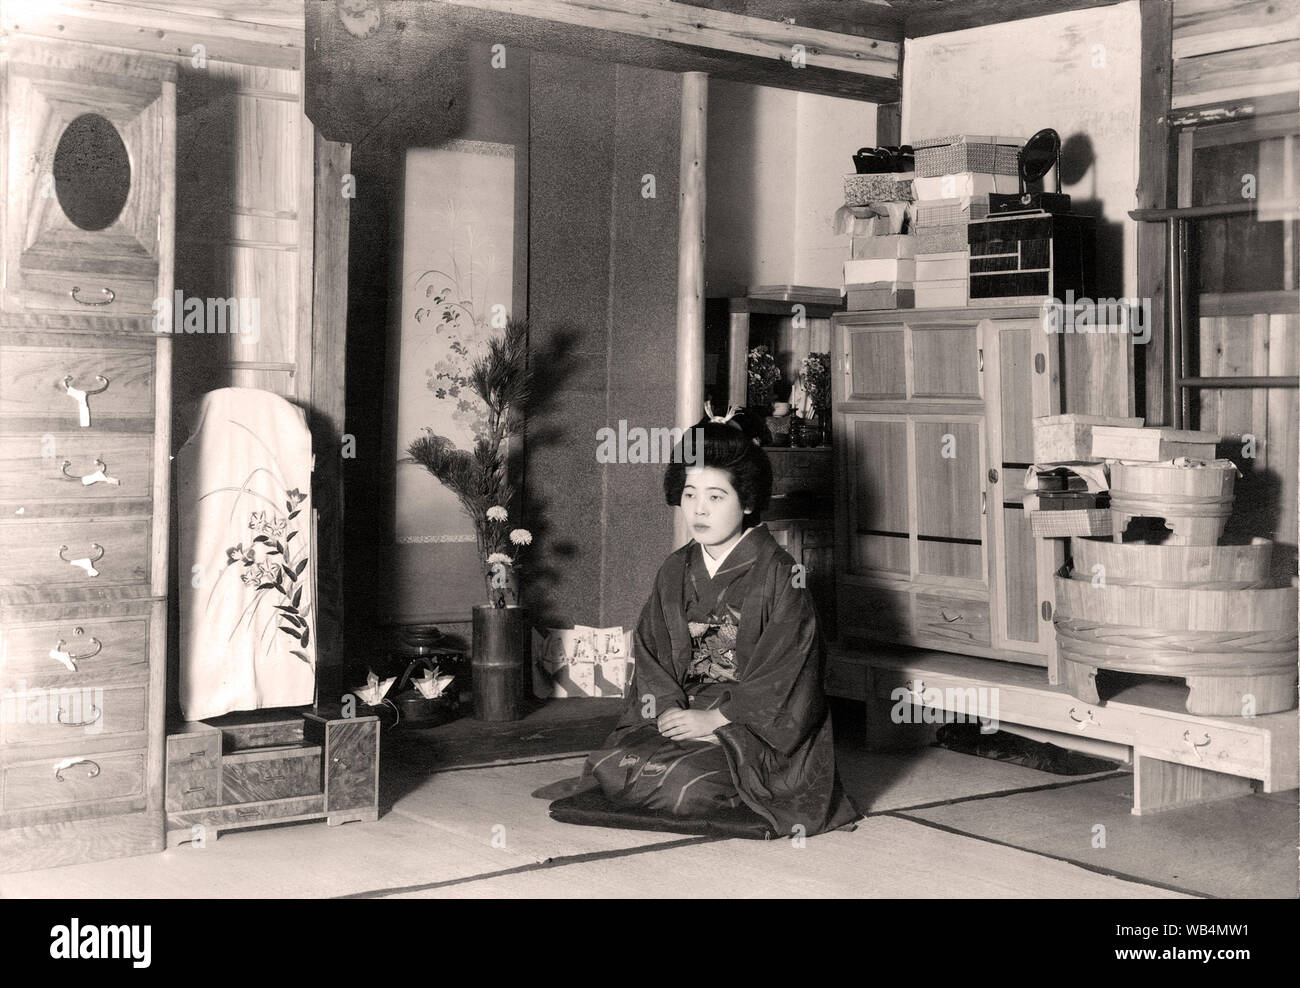 [ 1920s Japan - Japanese Bride with Trousseau ] —   A young woman in kimono sits in a room full of items that appear ready to be moved to a new home. Until the late 21st century it was customary to move new furniture ceremoniously to a newly married couple’s home.  20th century vintage gelatin silver print. Stock Photo